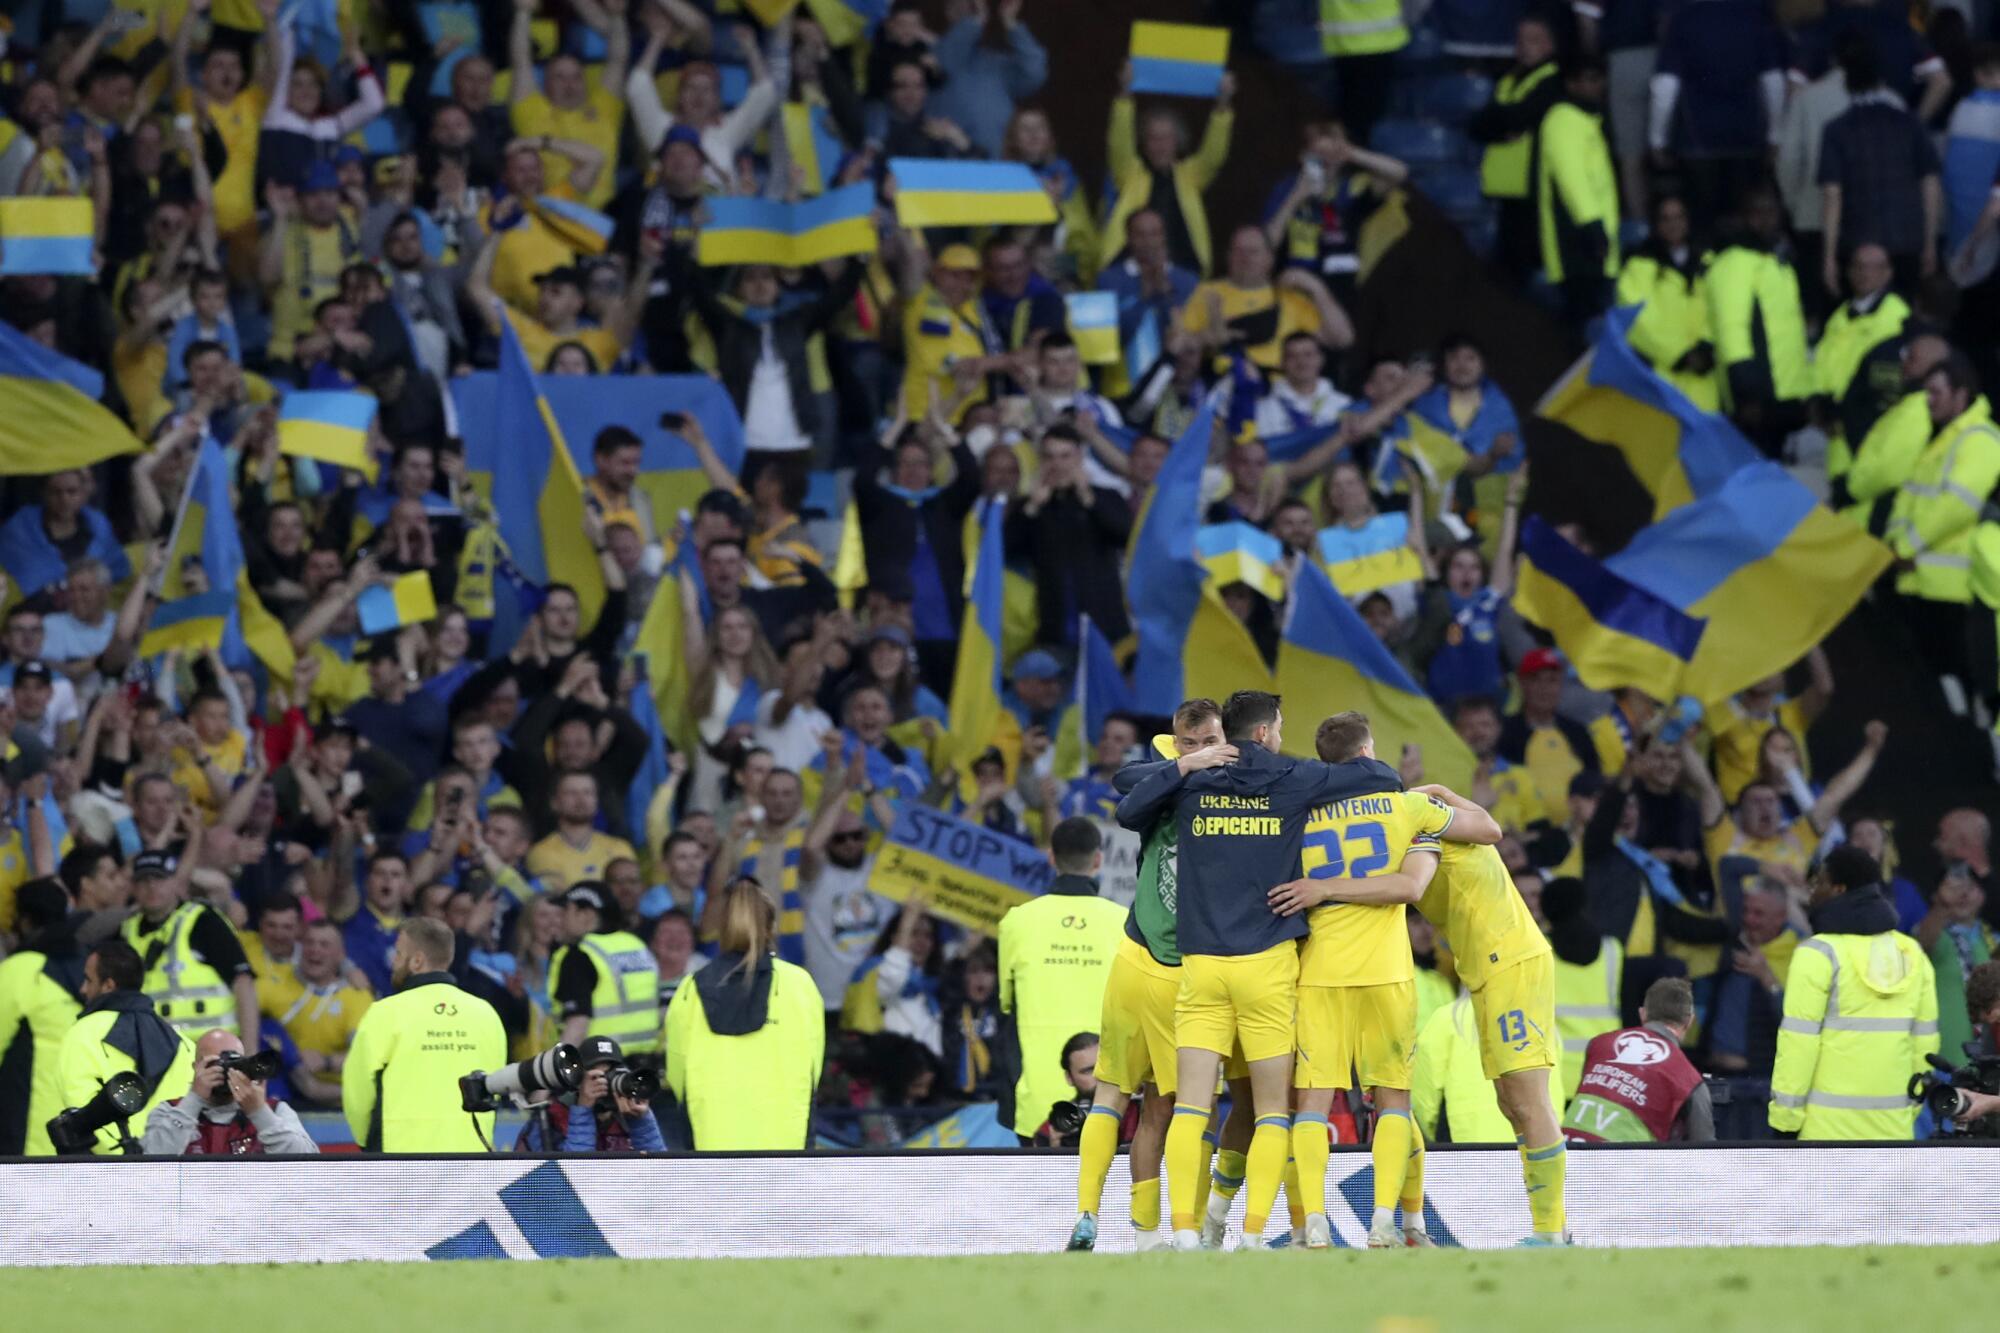 Ukrainian players celebrate after defeating Scotland 3-1 in a World Cup qualifier Wednesday in Glasgow, Scotland.